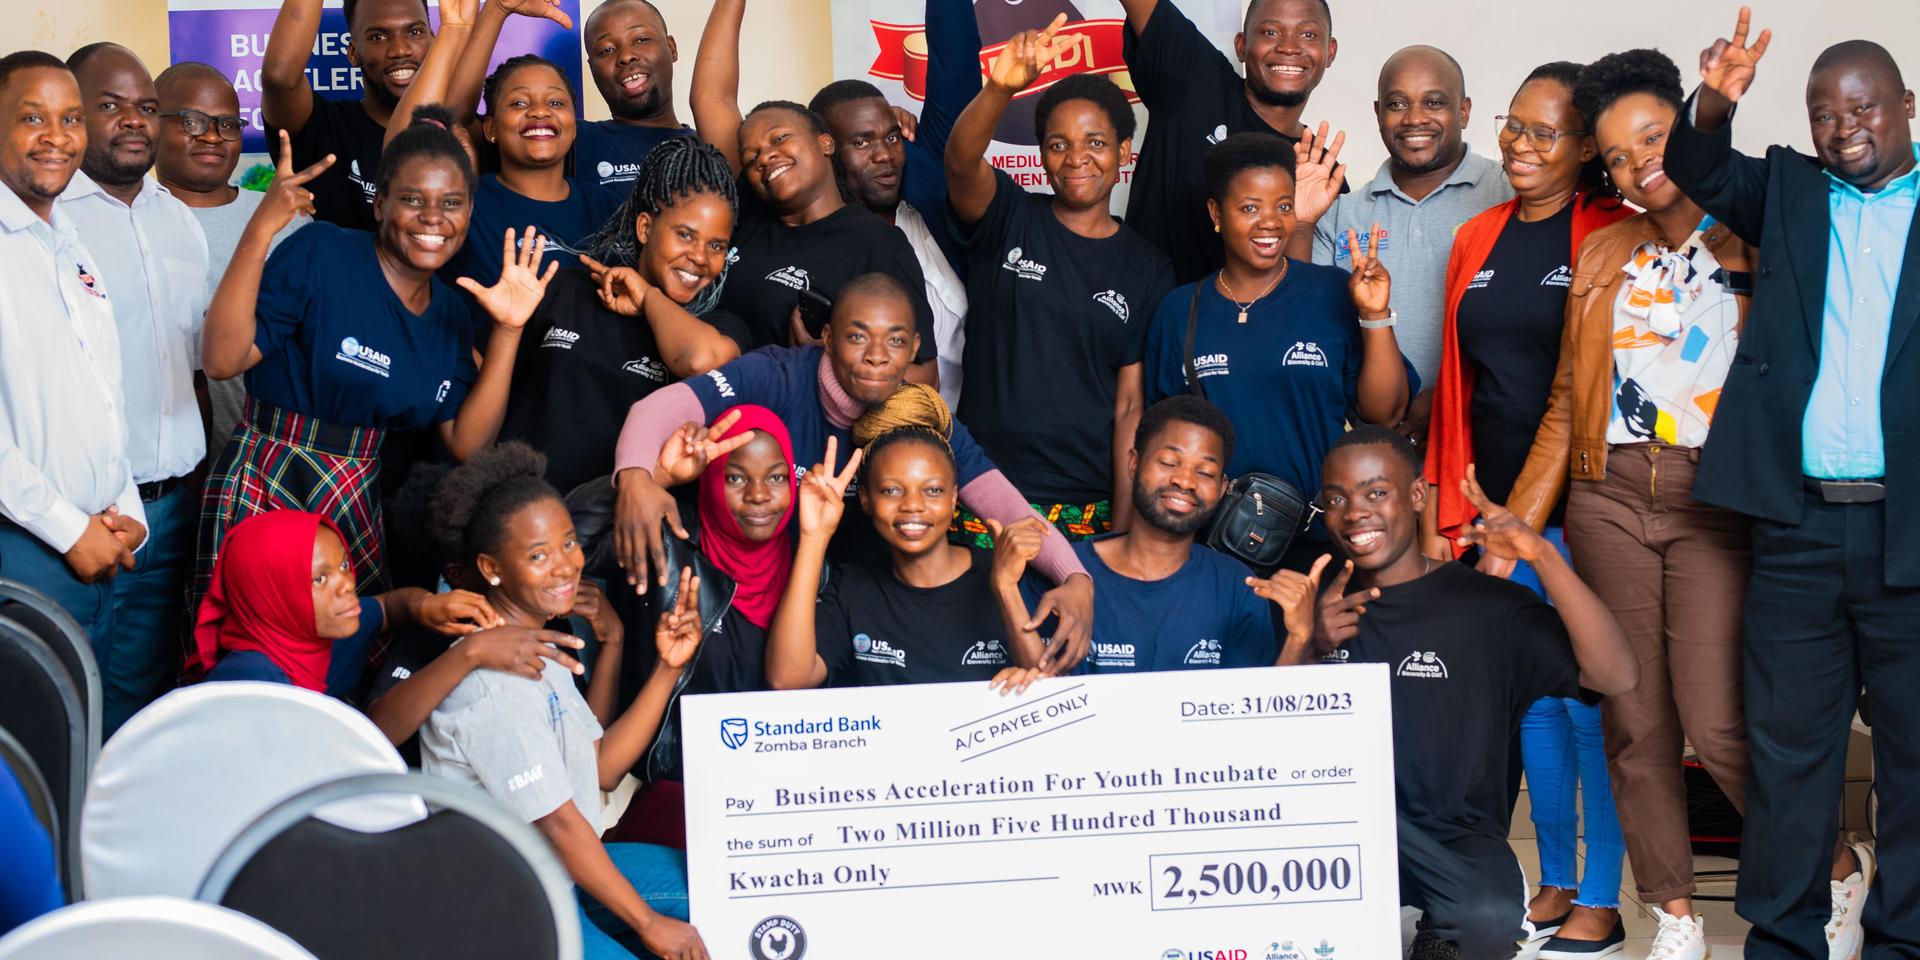 Business Acceleration for Youth Project Awards 100 Grants to Youth Entrepreneurs - Alliance Bioversity International - CIAT